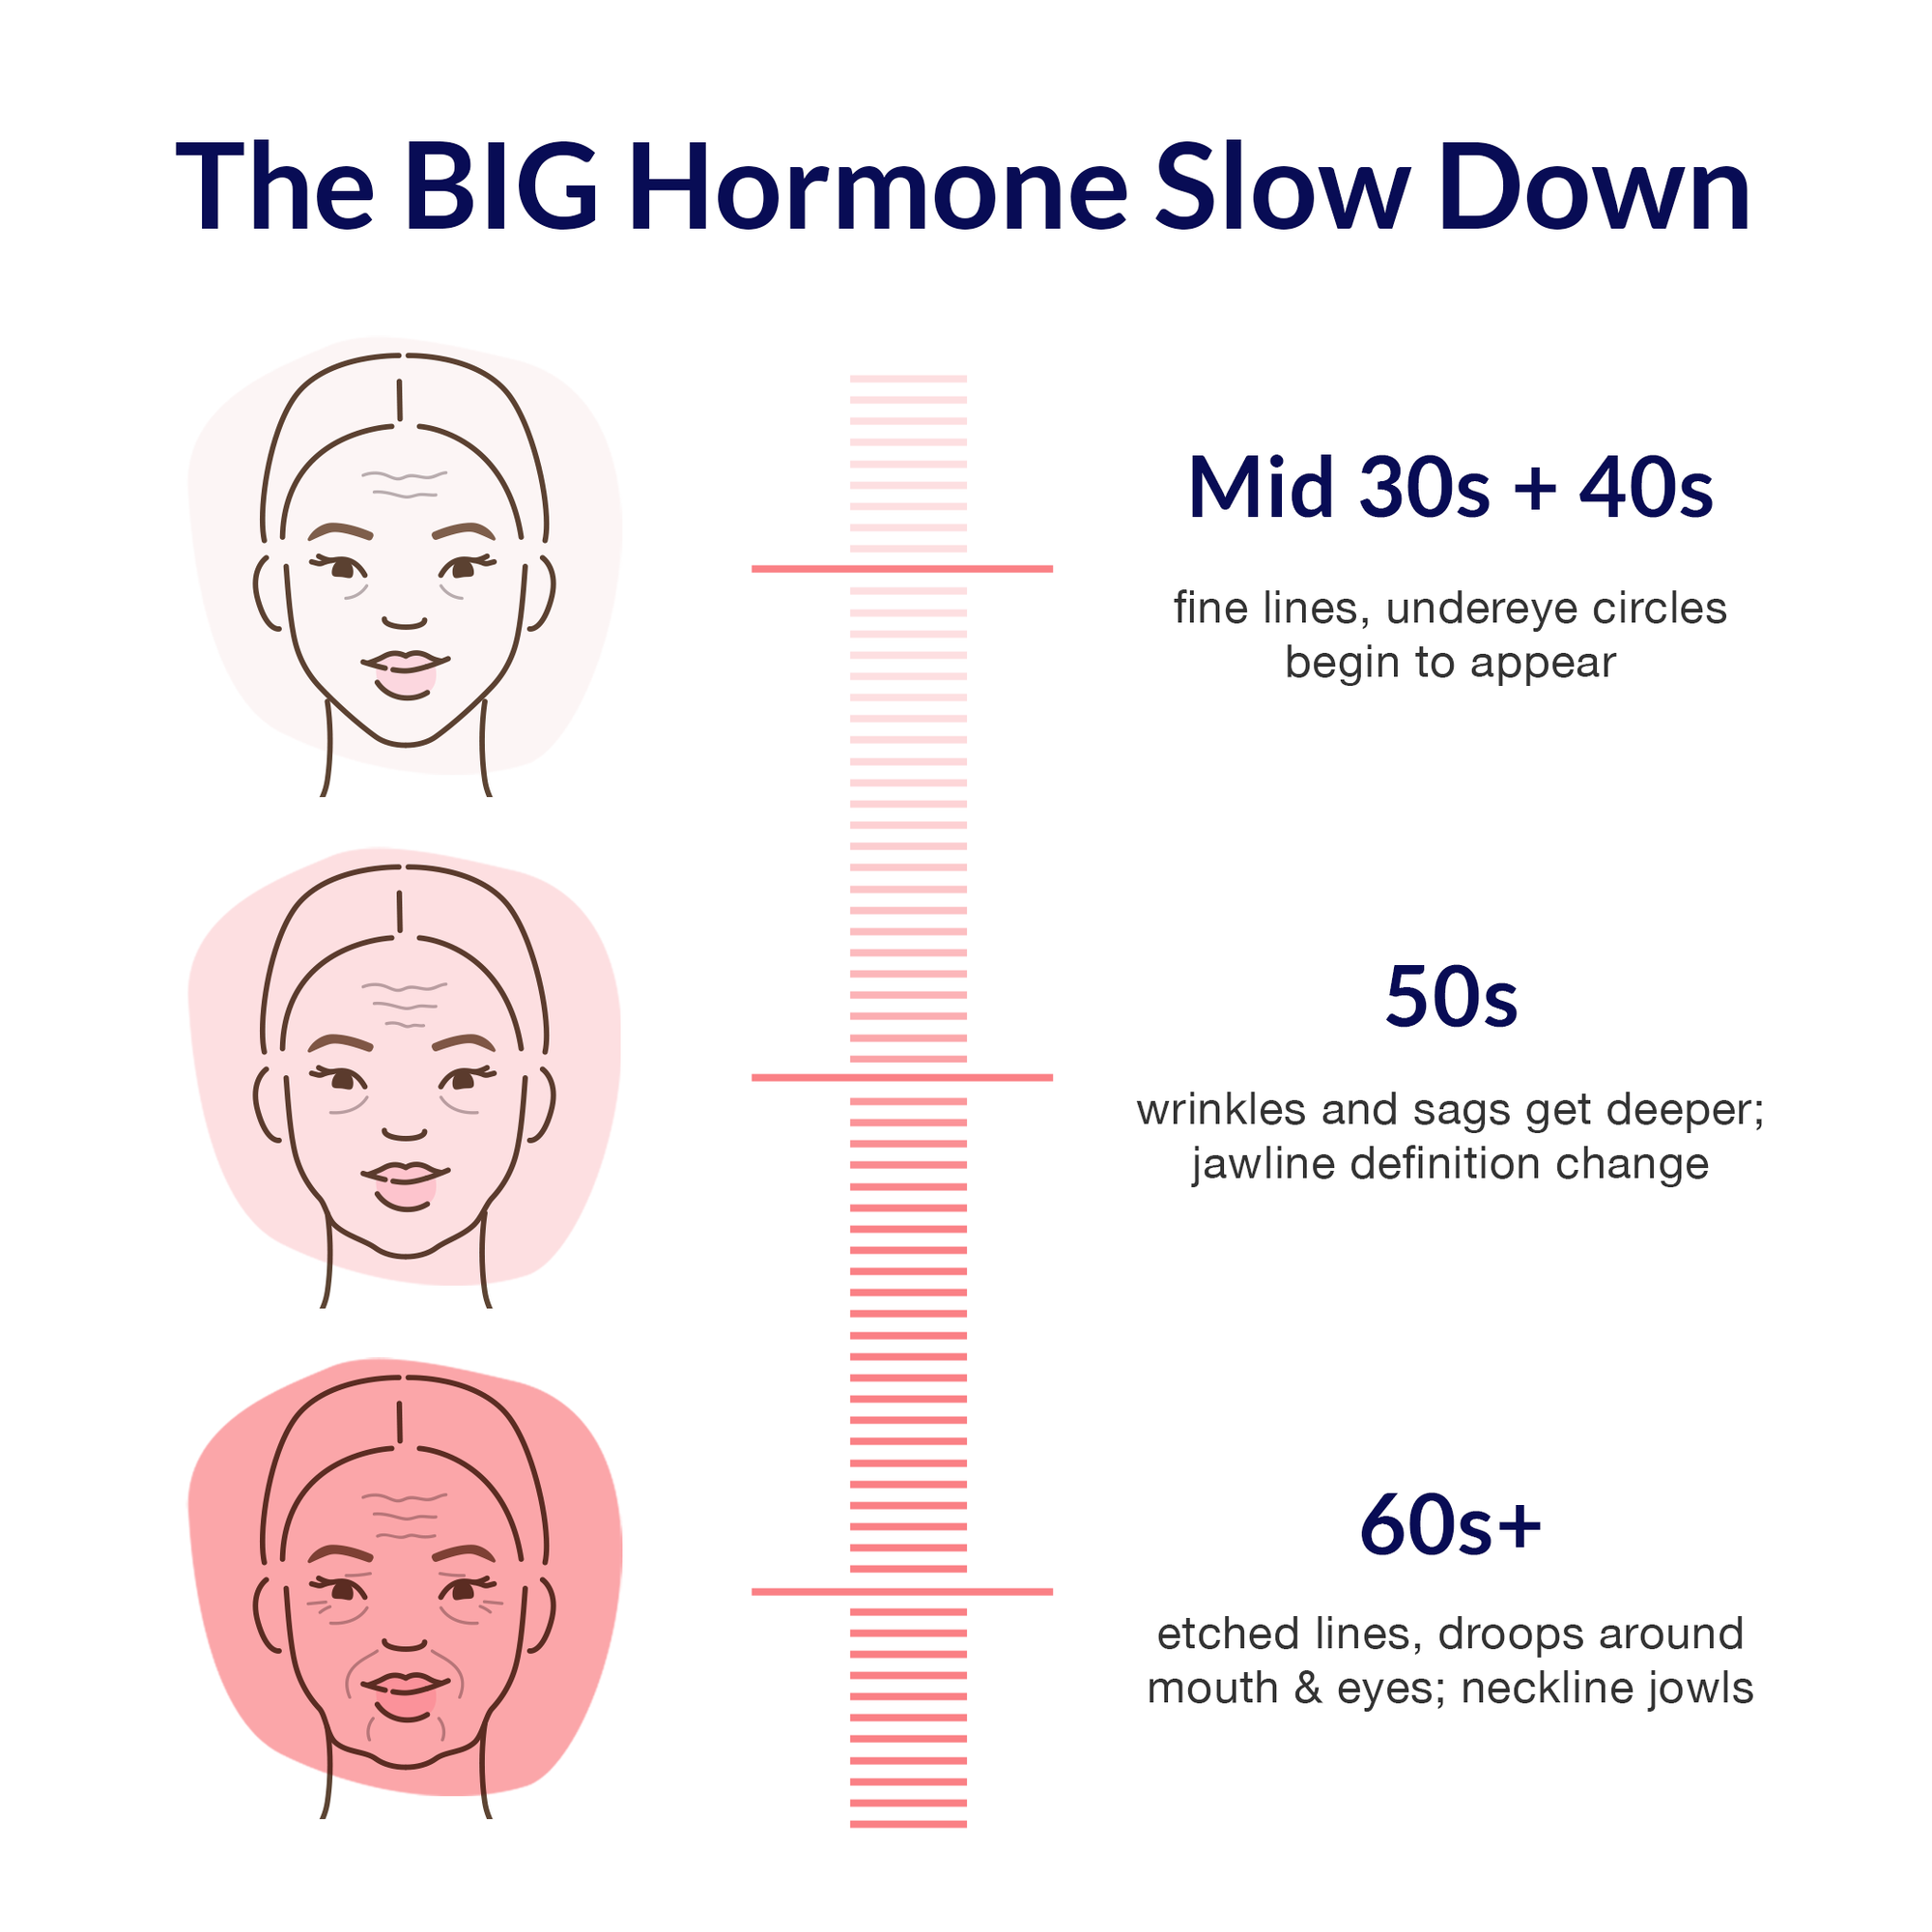 The big hormone slow down chart. mid 30s-40s fine lines, undereye circles begin to appear.  50s wrinkles and sags get deeper; jawline definition change, 60+ etched lines, droops around mouth & eyes, neckline jowls. Aging sucks & anti aging products do to